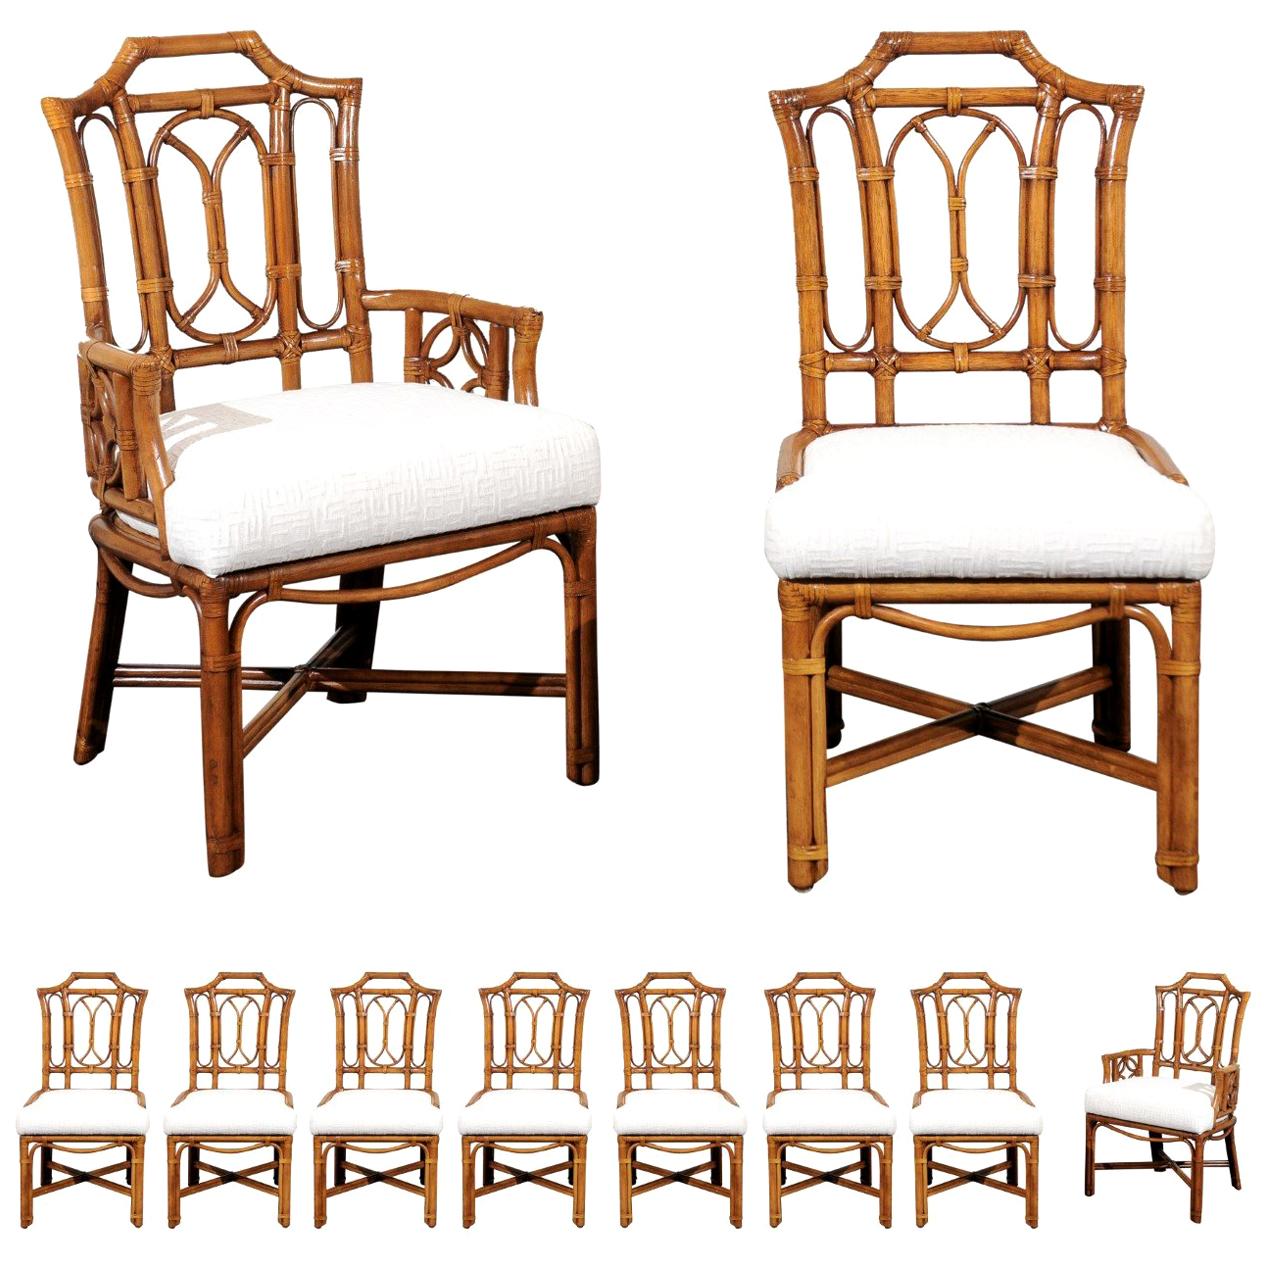 Majestic Restored Set of 10 Pagoda Style High Back Dining Chairs by Ficks Reed